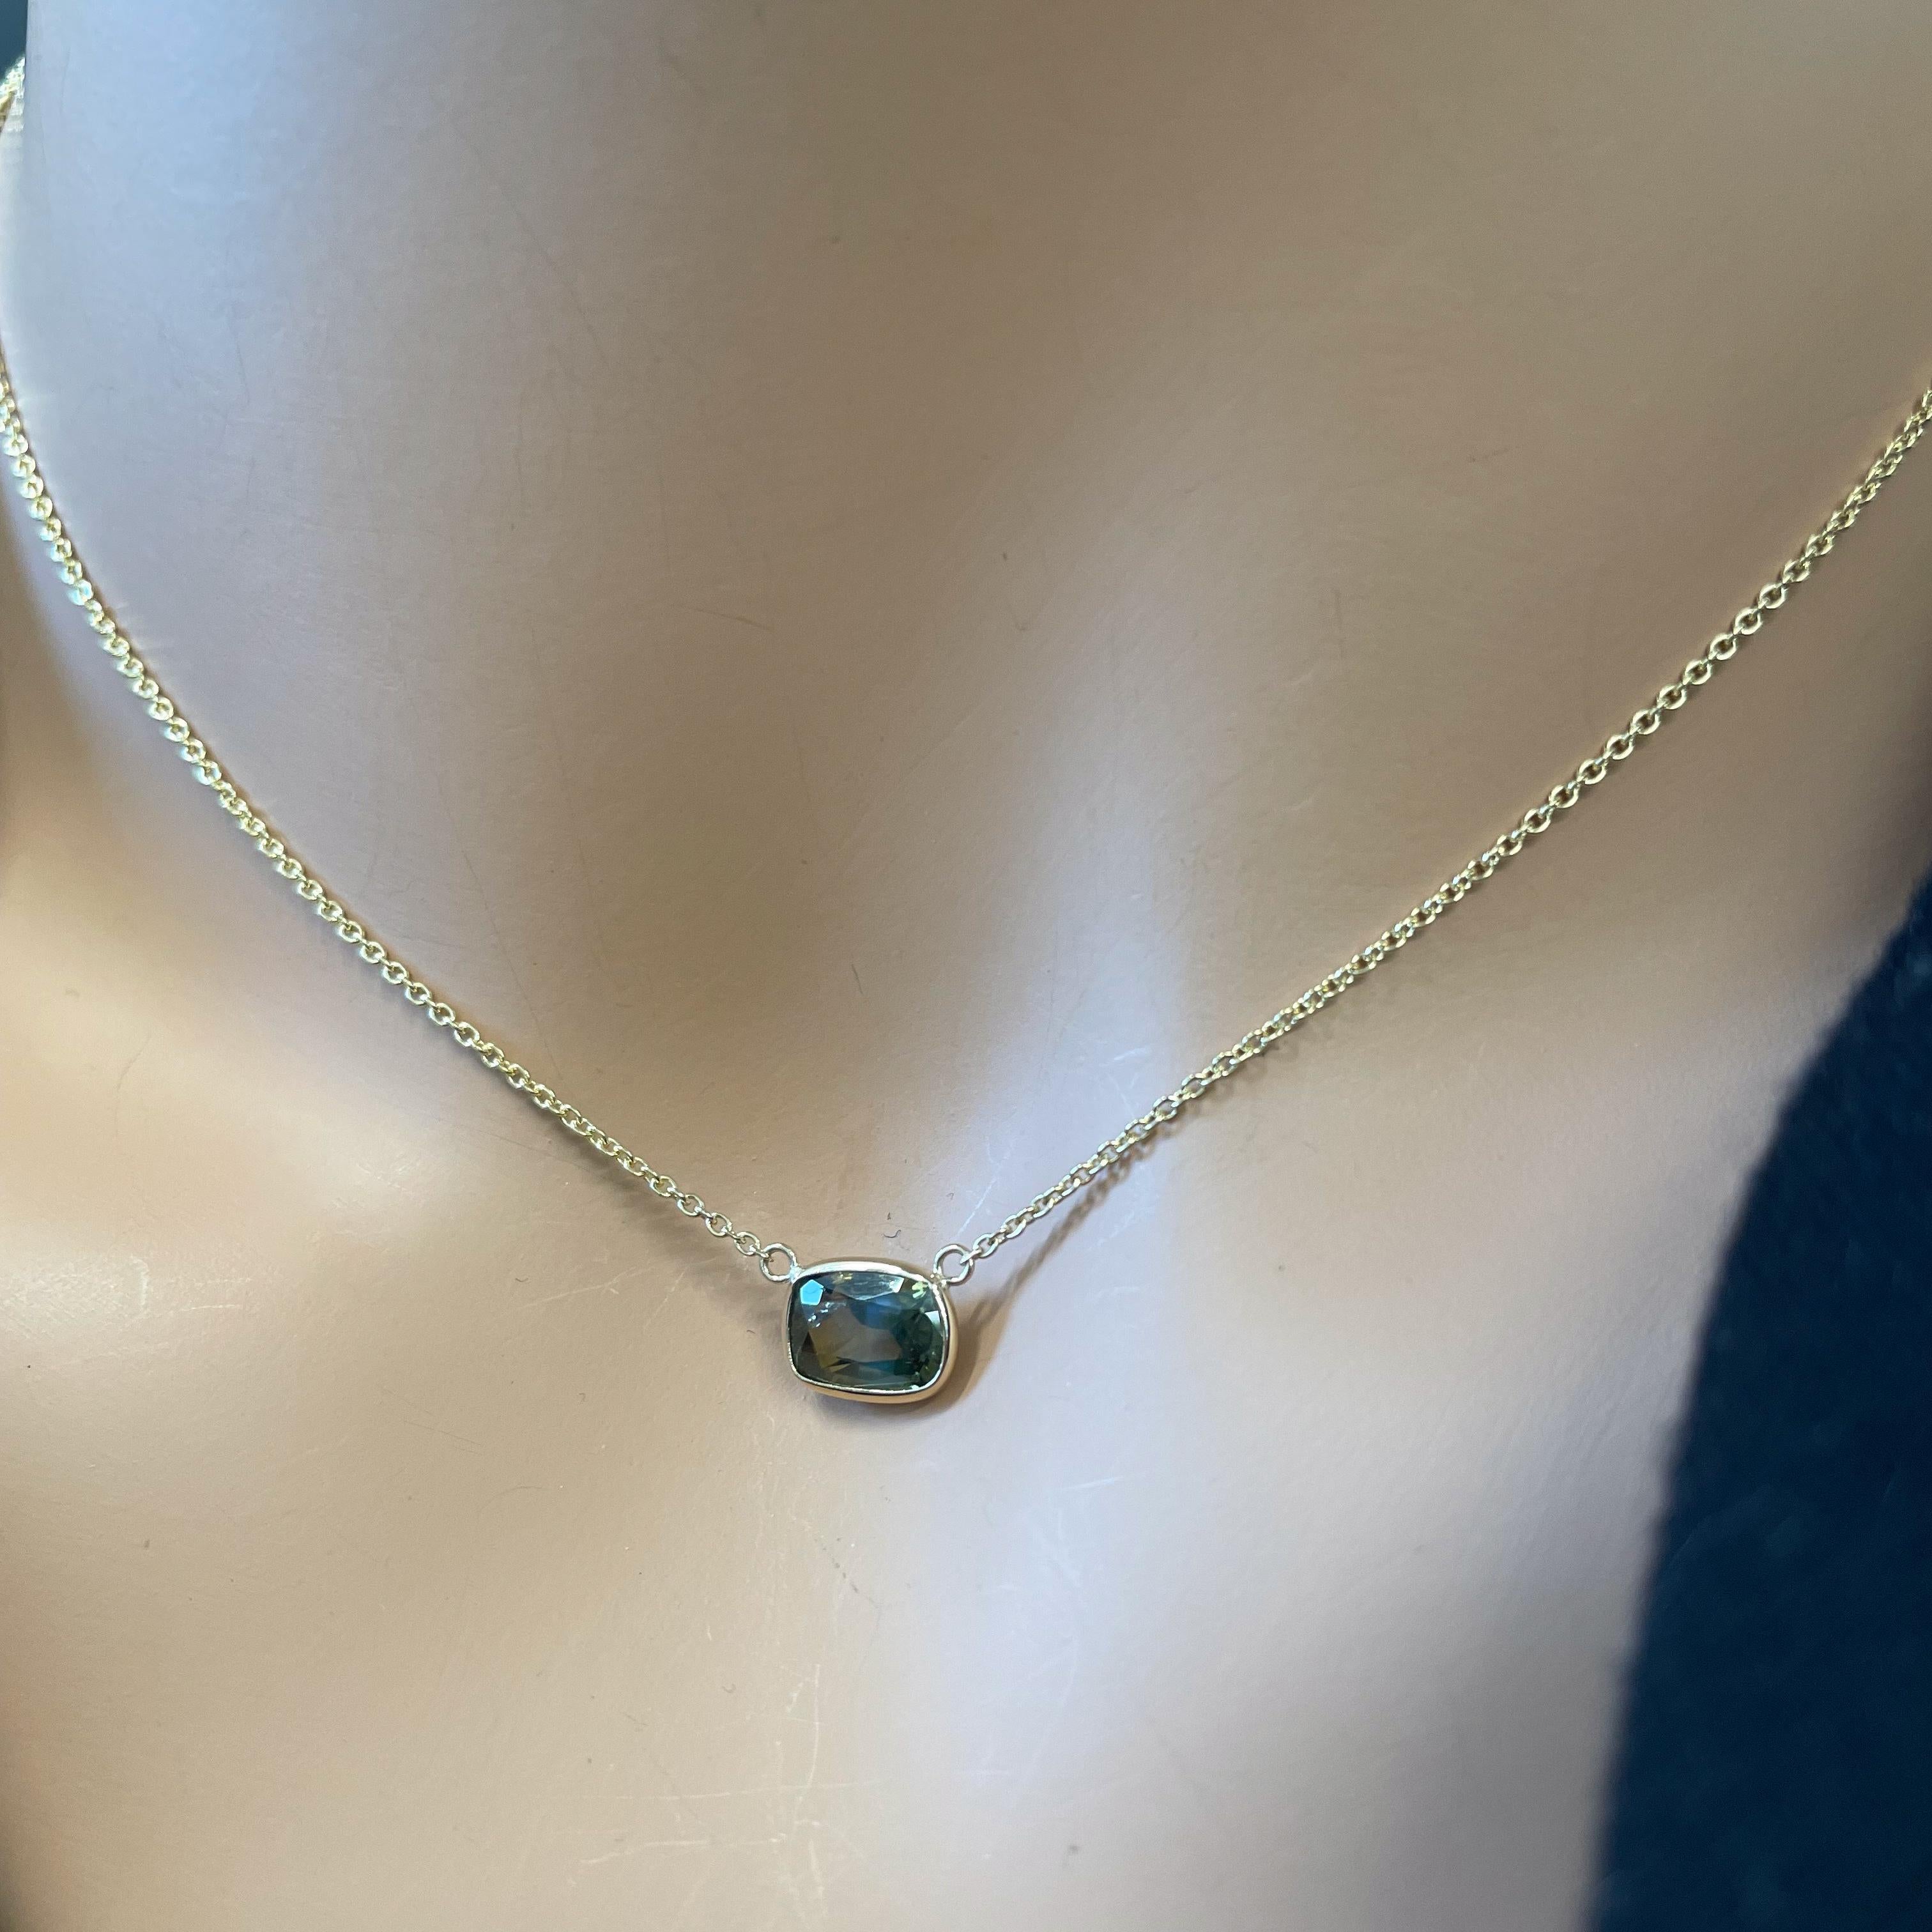 The 2.11 carat Cushion Cut Green Alexandrite Necklace in 14K Yellow Gold showcases the captivating allure of natural gemstones and the artistry of fine jewelry, making it a true testament to both beauty and sophistication The Alexandrite gemstone is